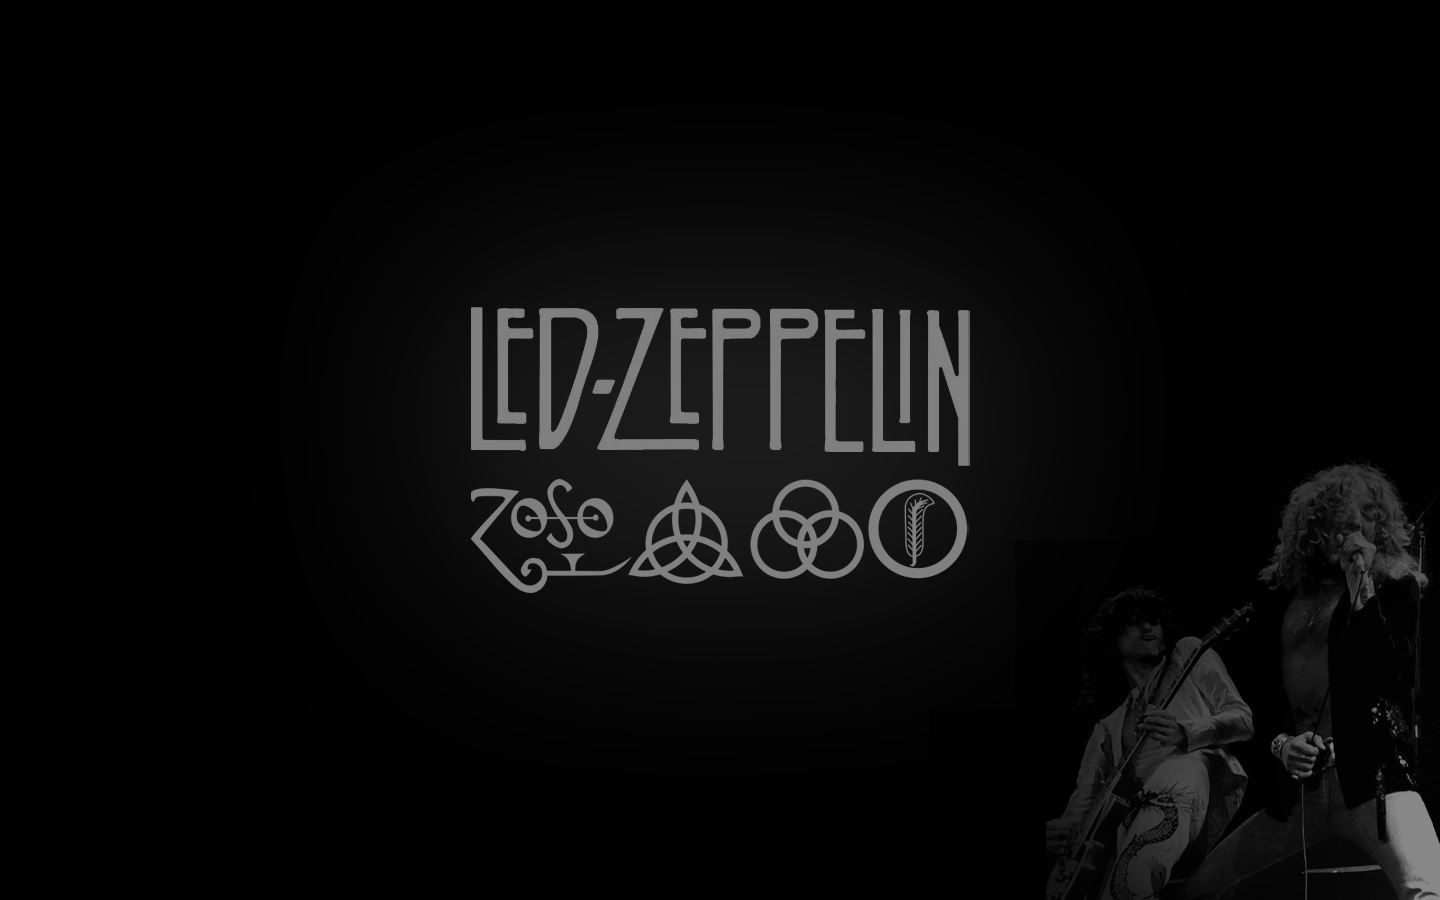 Led Zeppelin phone wallpaper» 1080P, 2k, 4k Full HD Wallpapers, Backgrounds  Free Download | Wallpaper Crafter